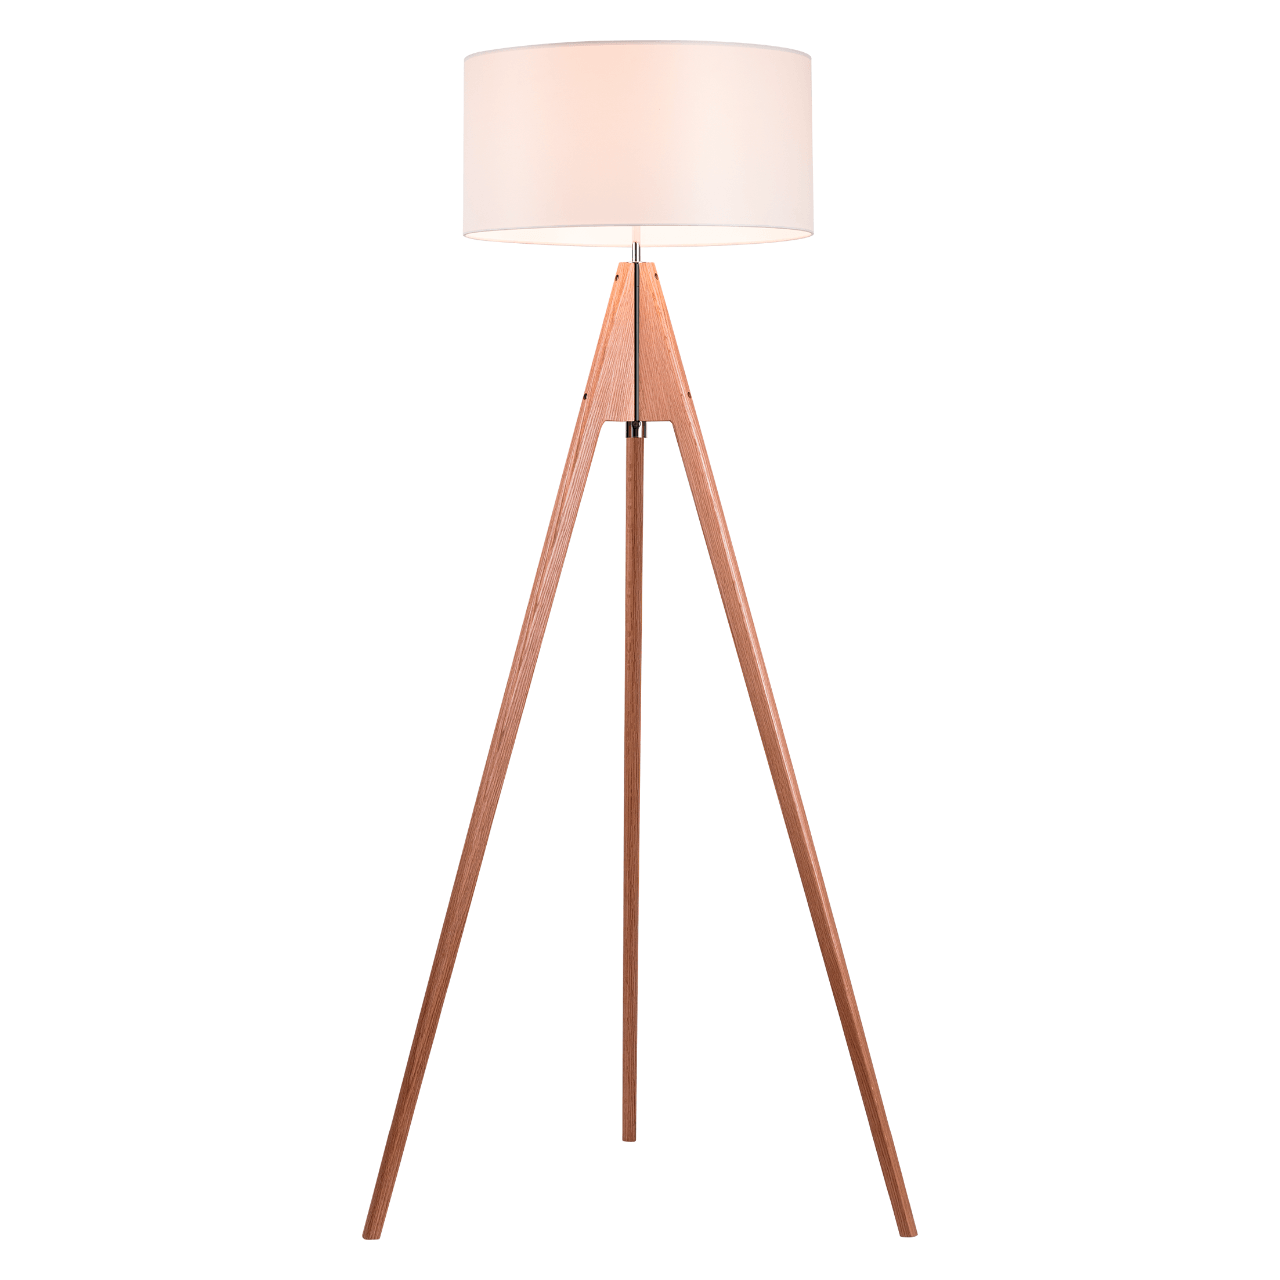 Pageone - Signal. Floor Lamp - Hbdepot